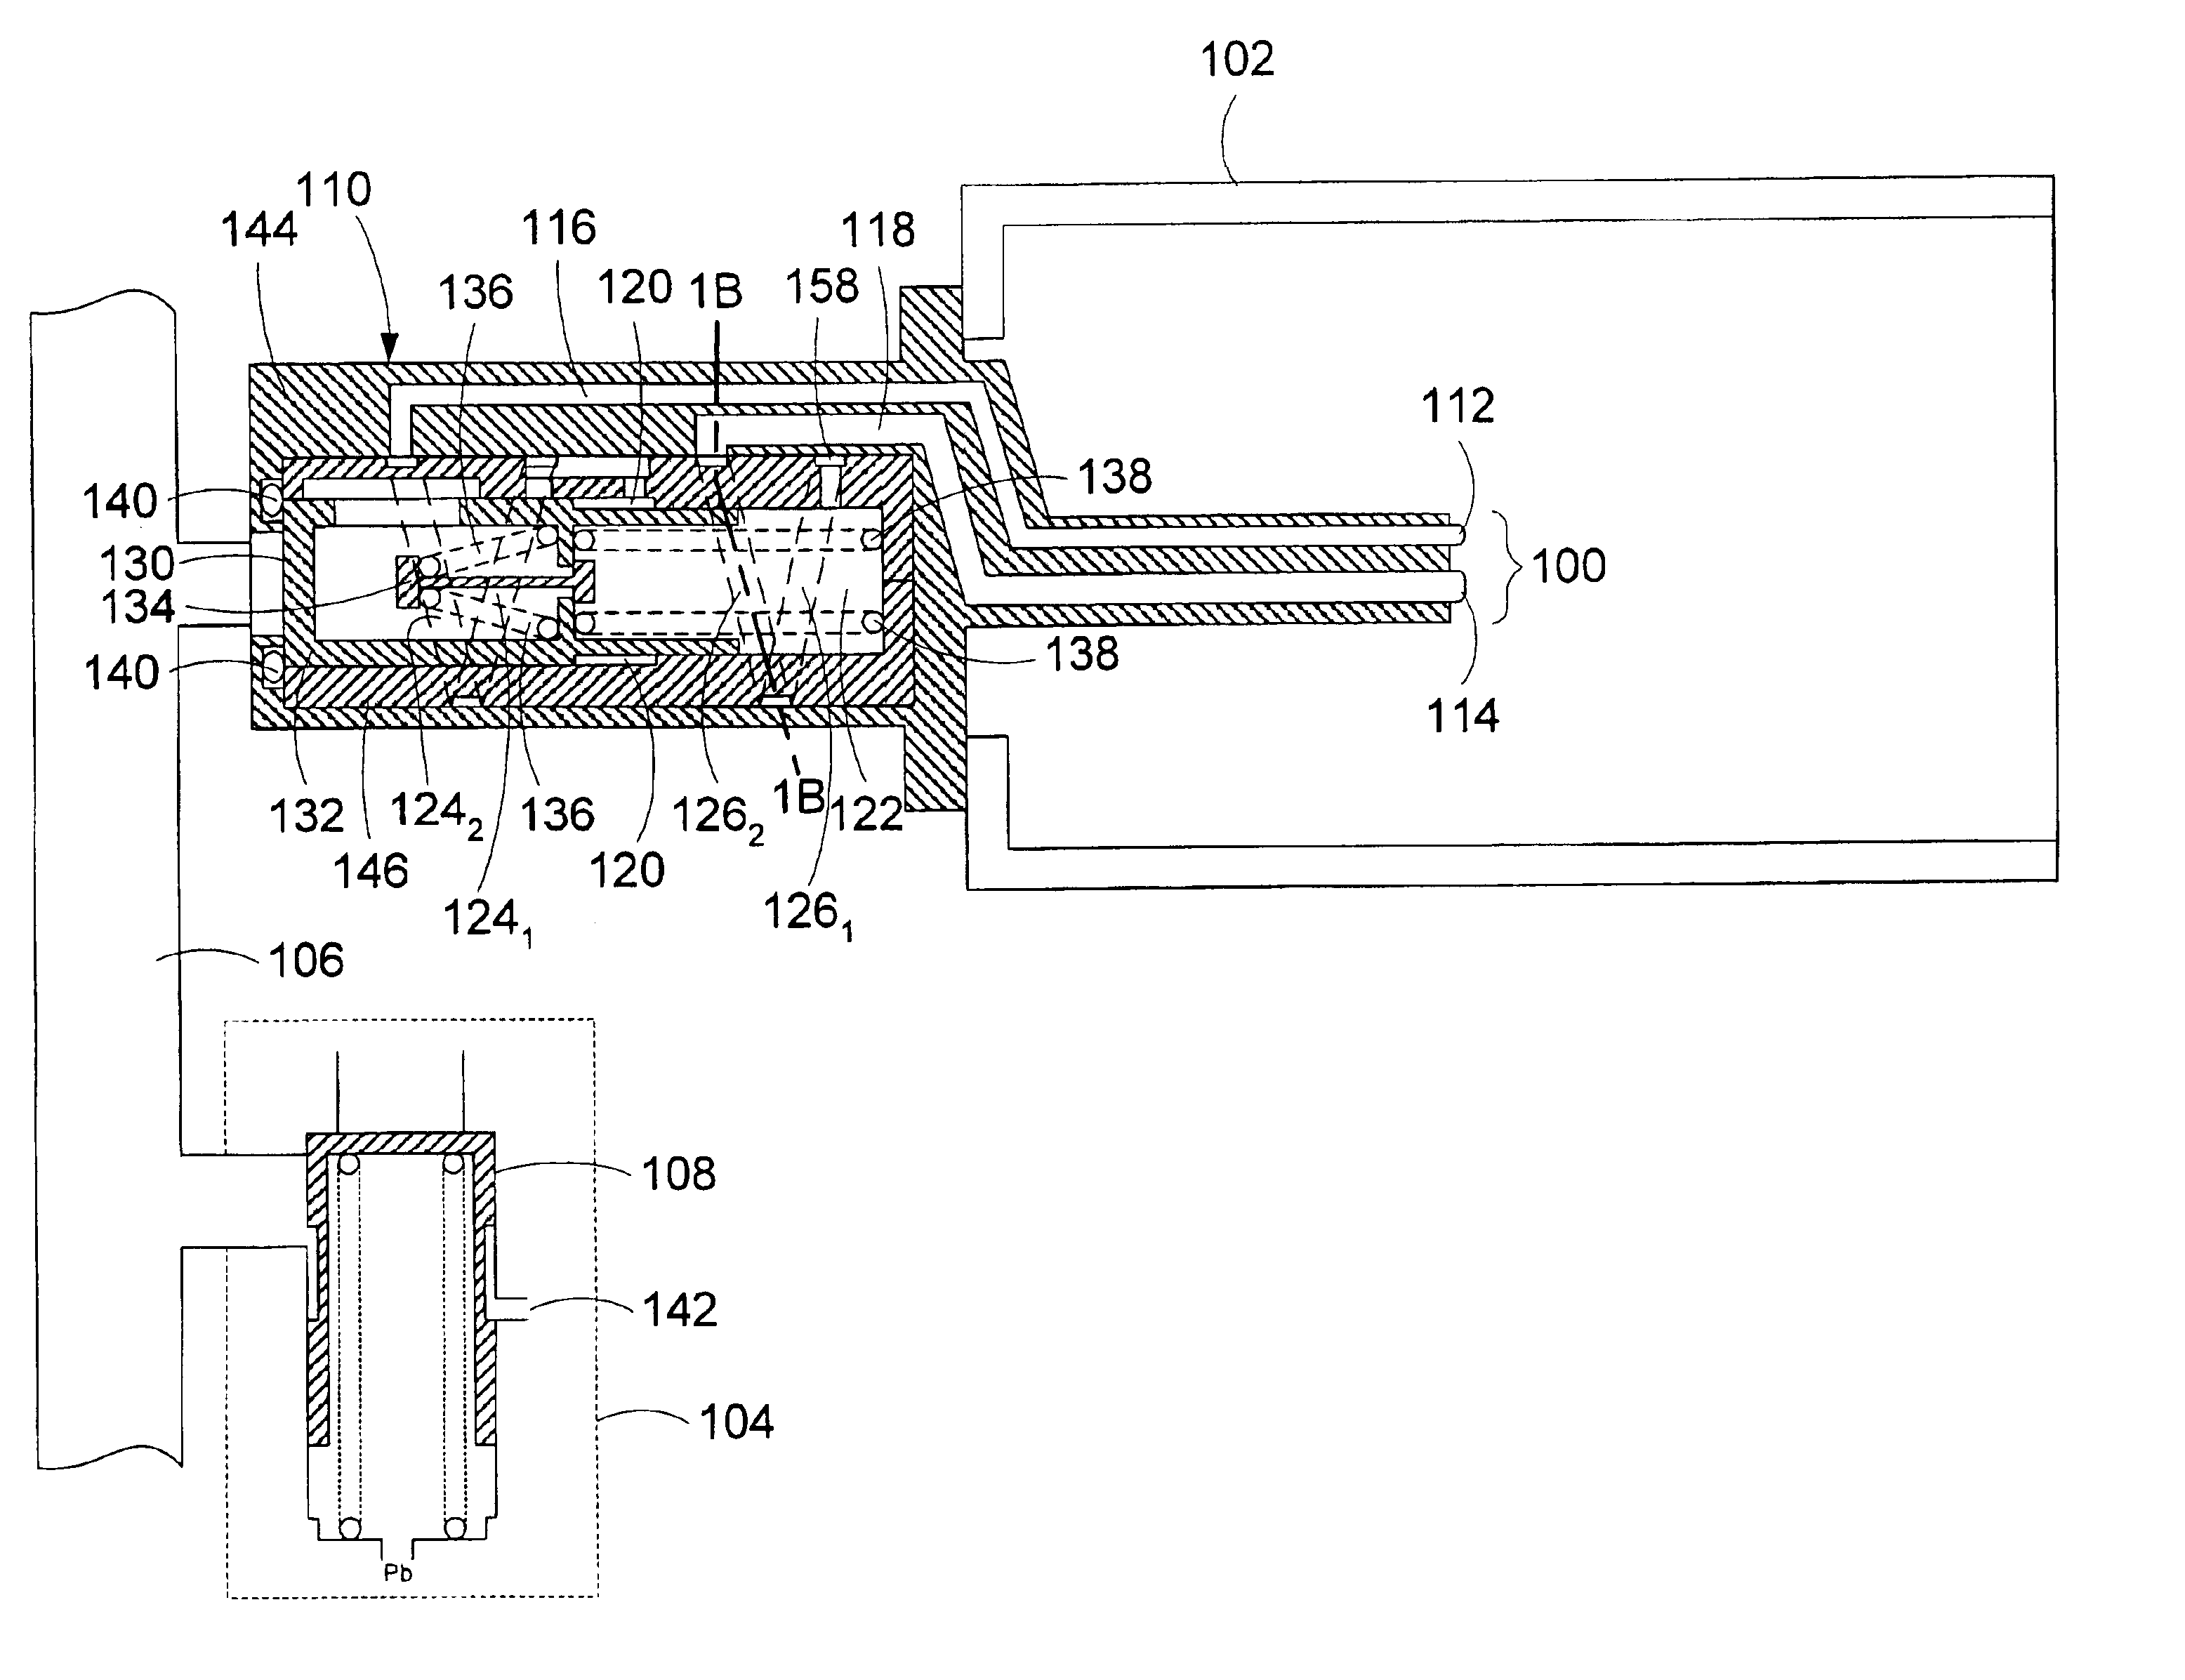 Nozzle assembly with flow divider and ecology valve